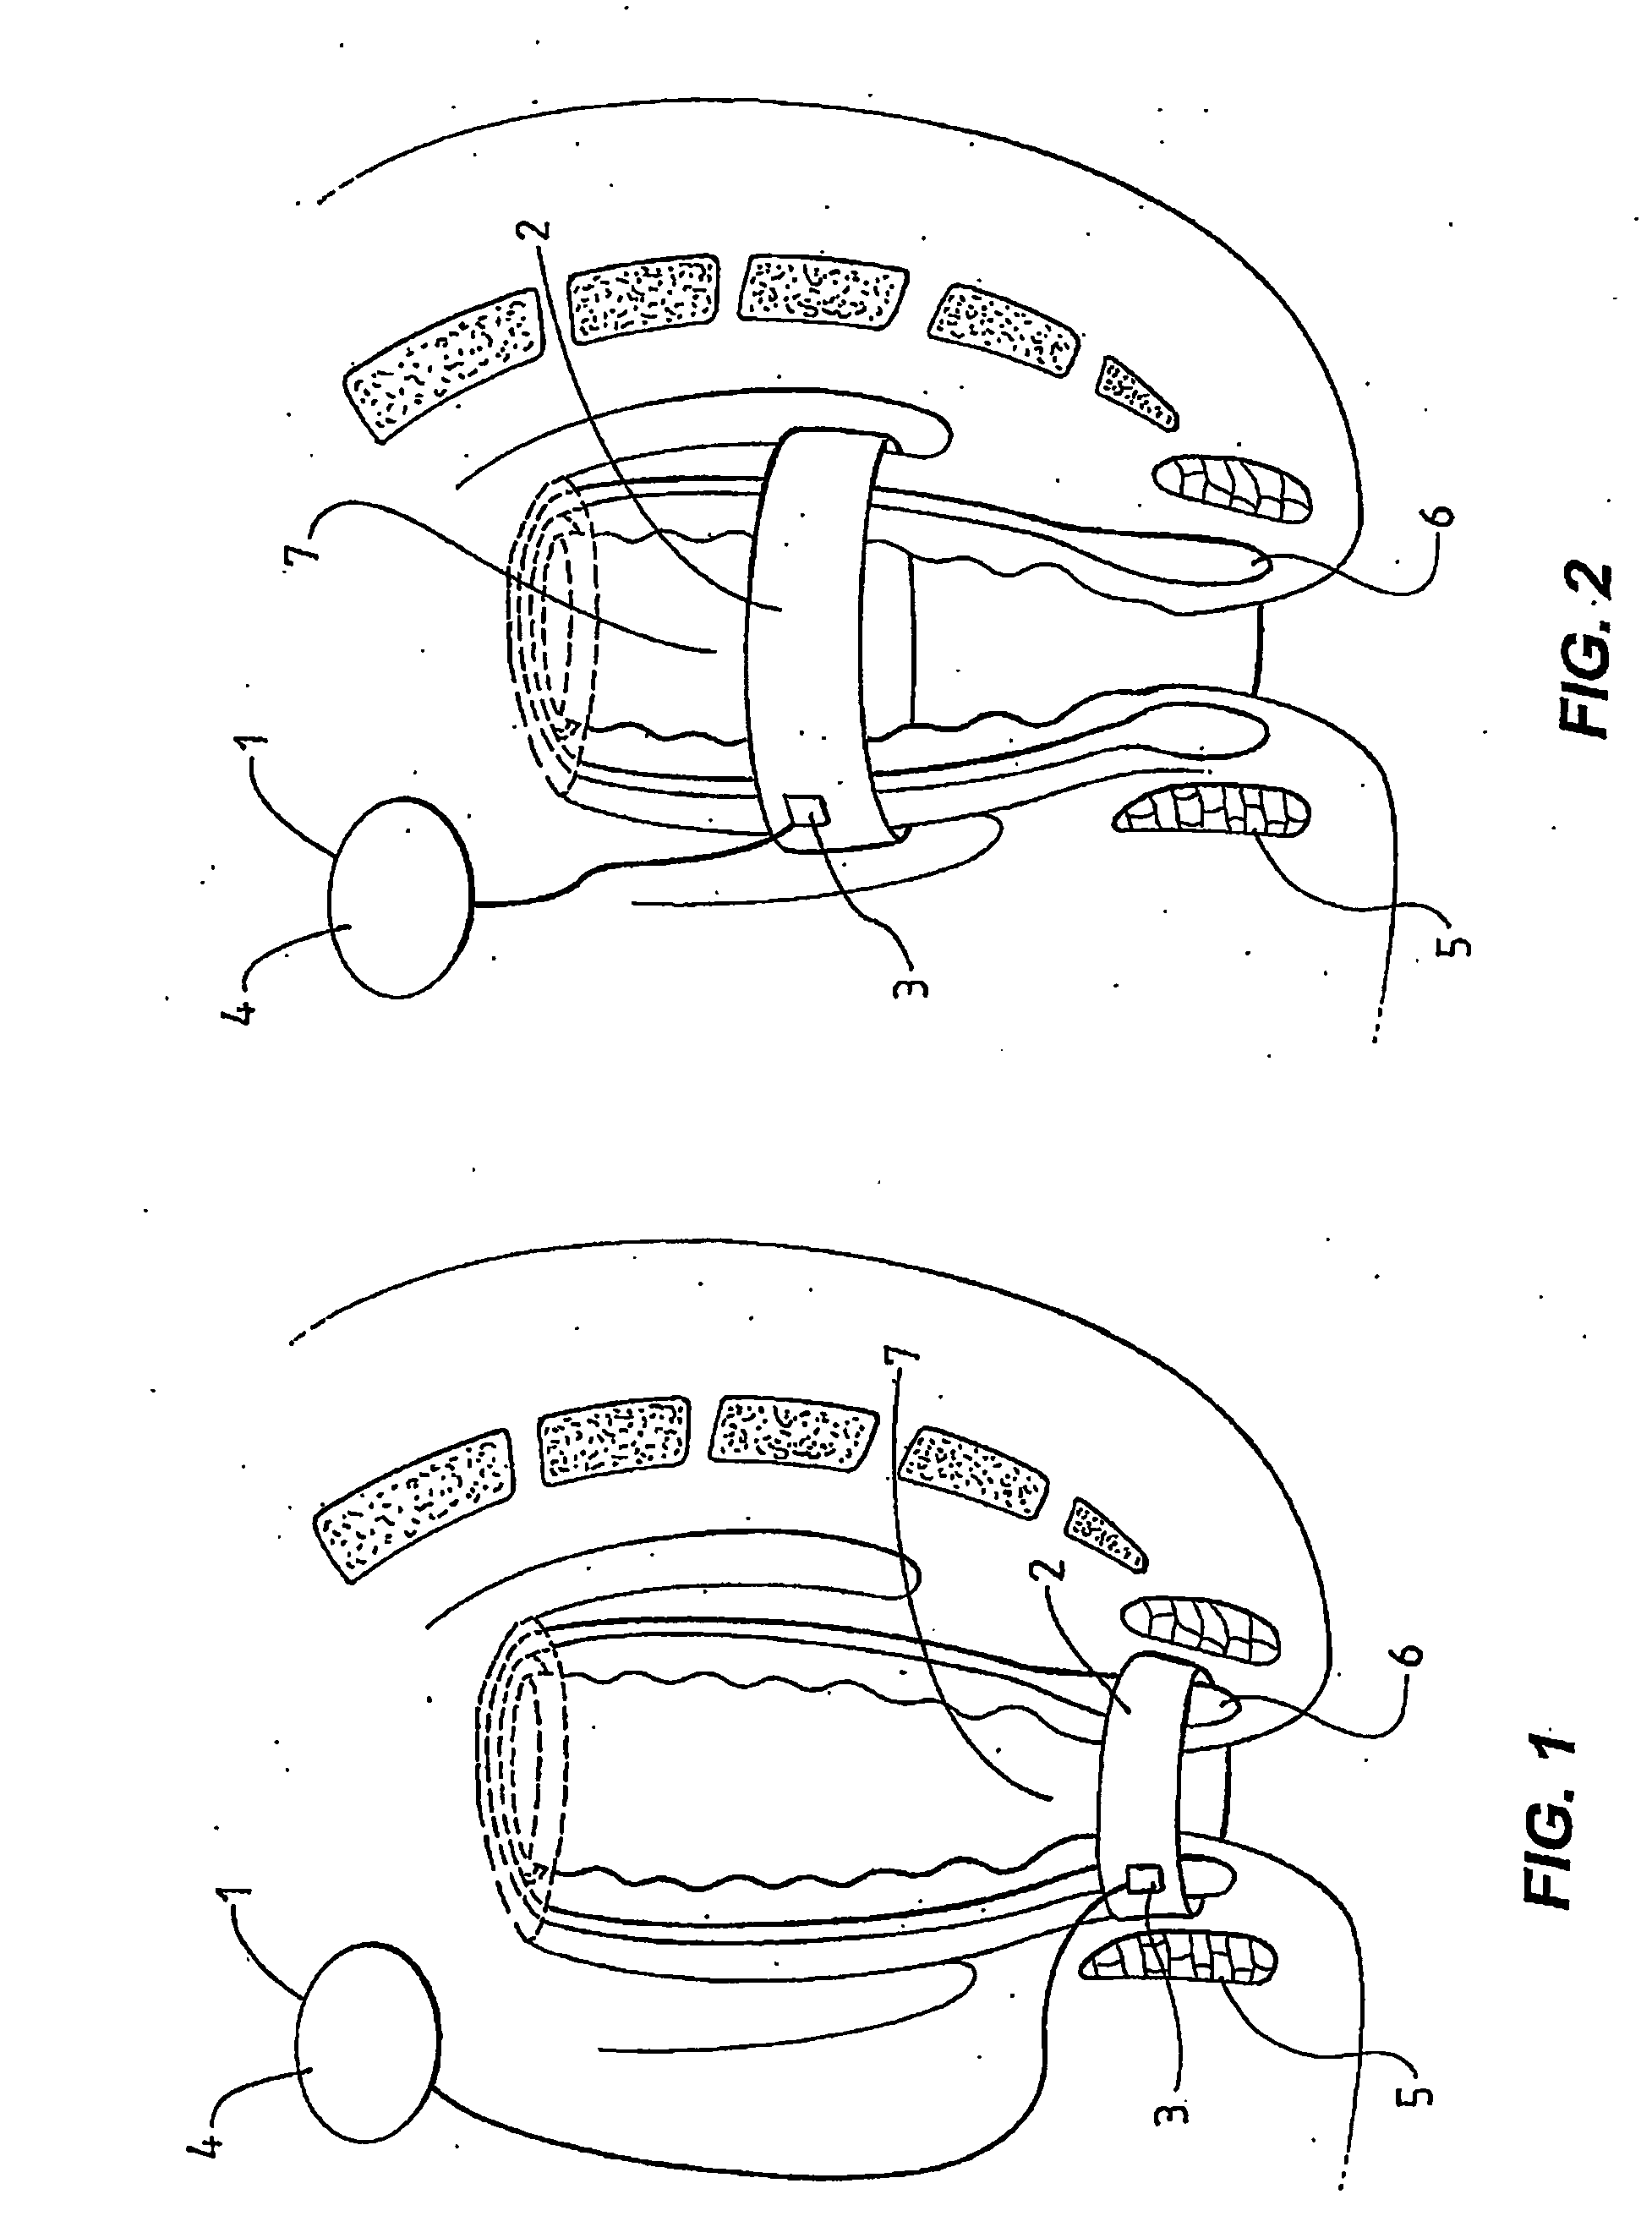 Method and Apparatus for Treating Fecal Incontinence